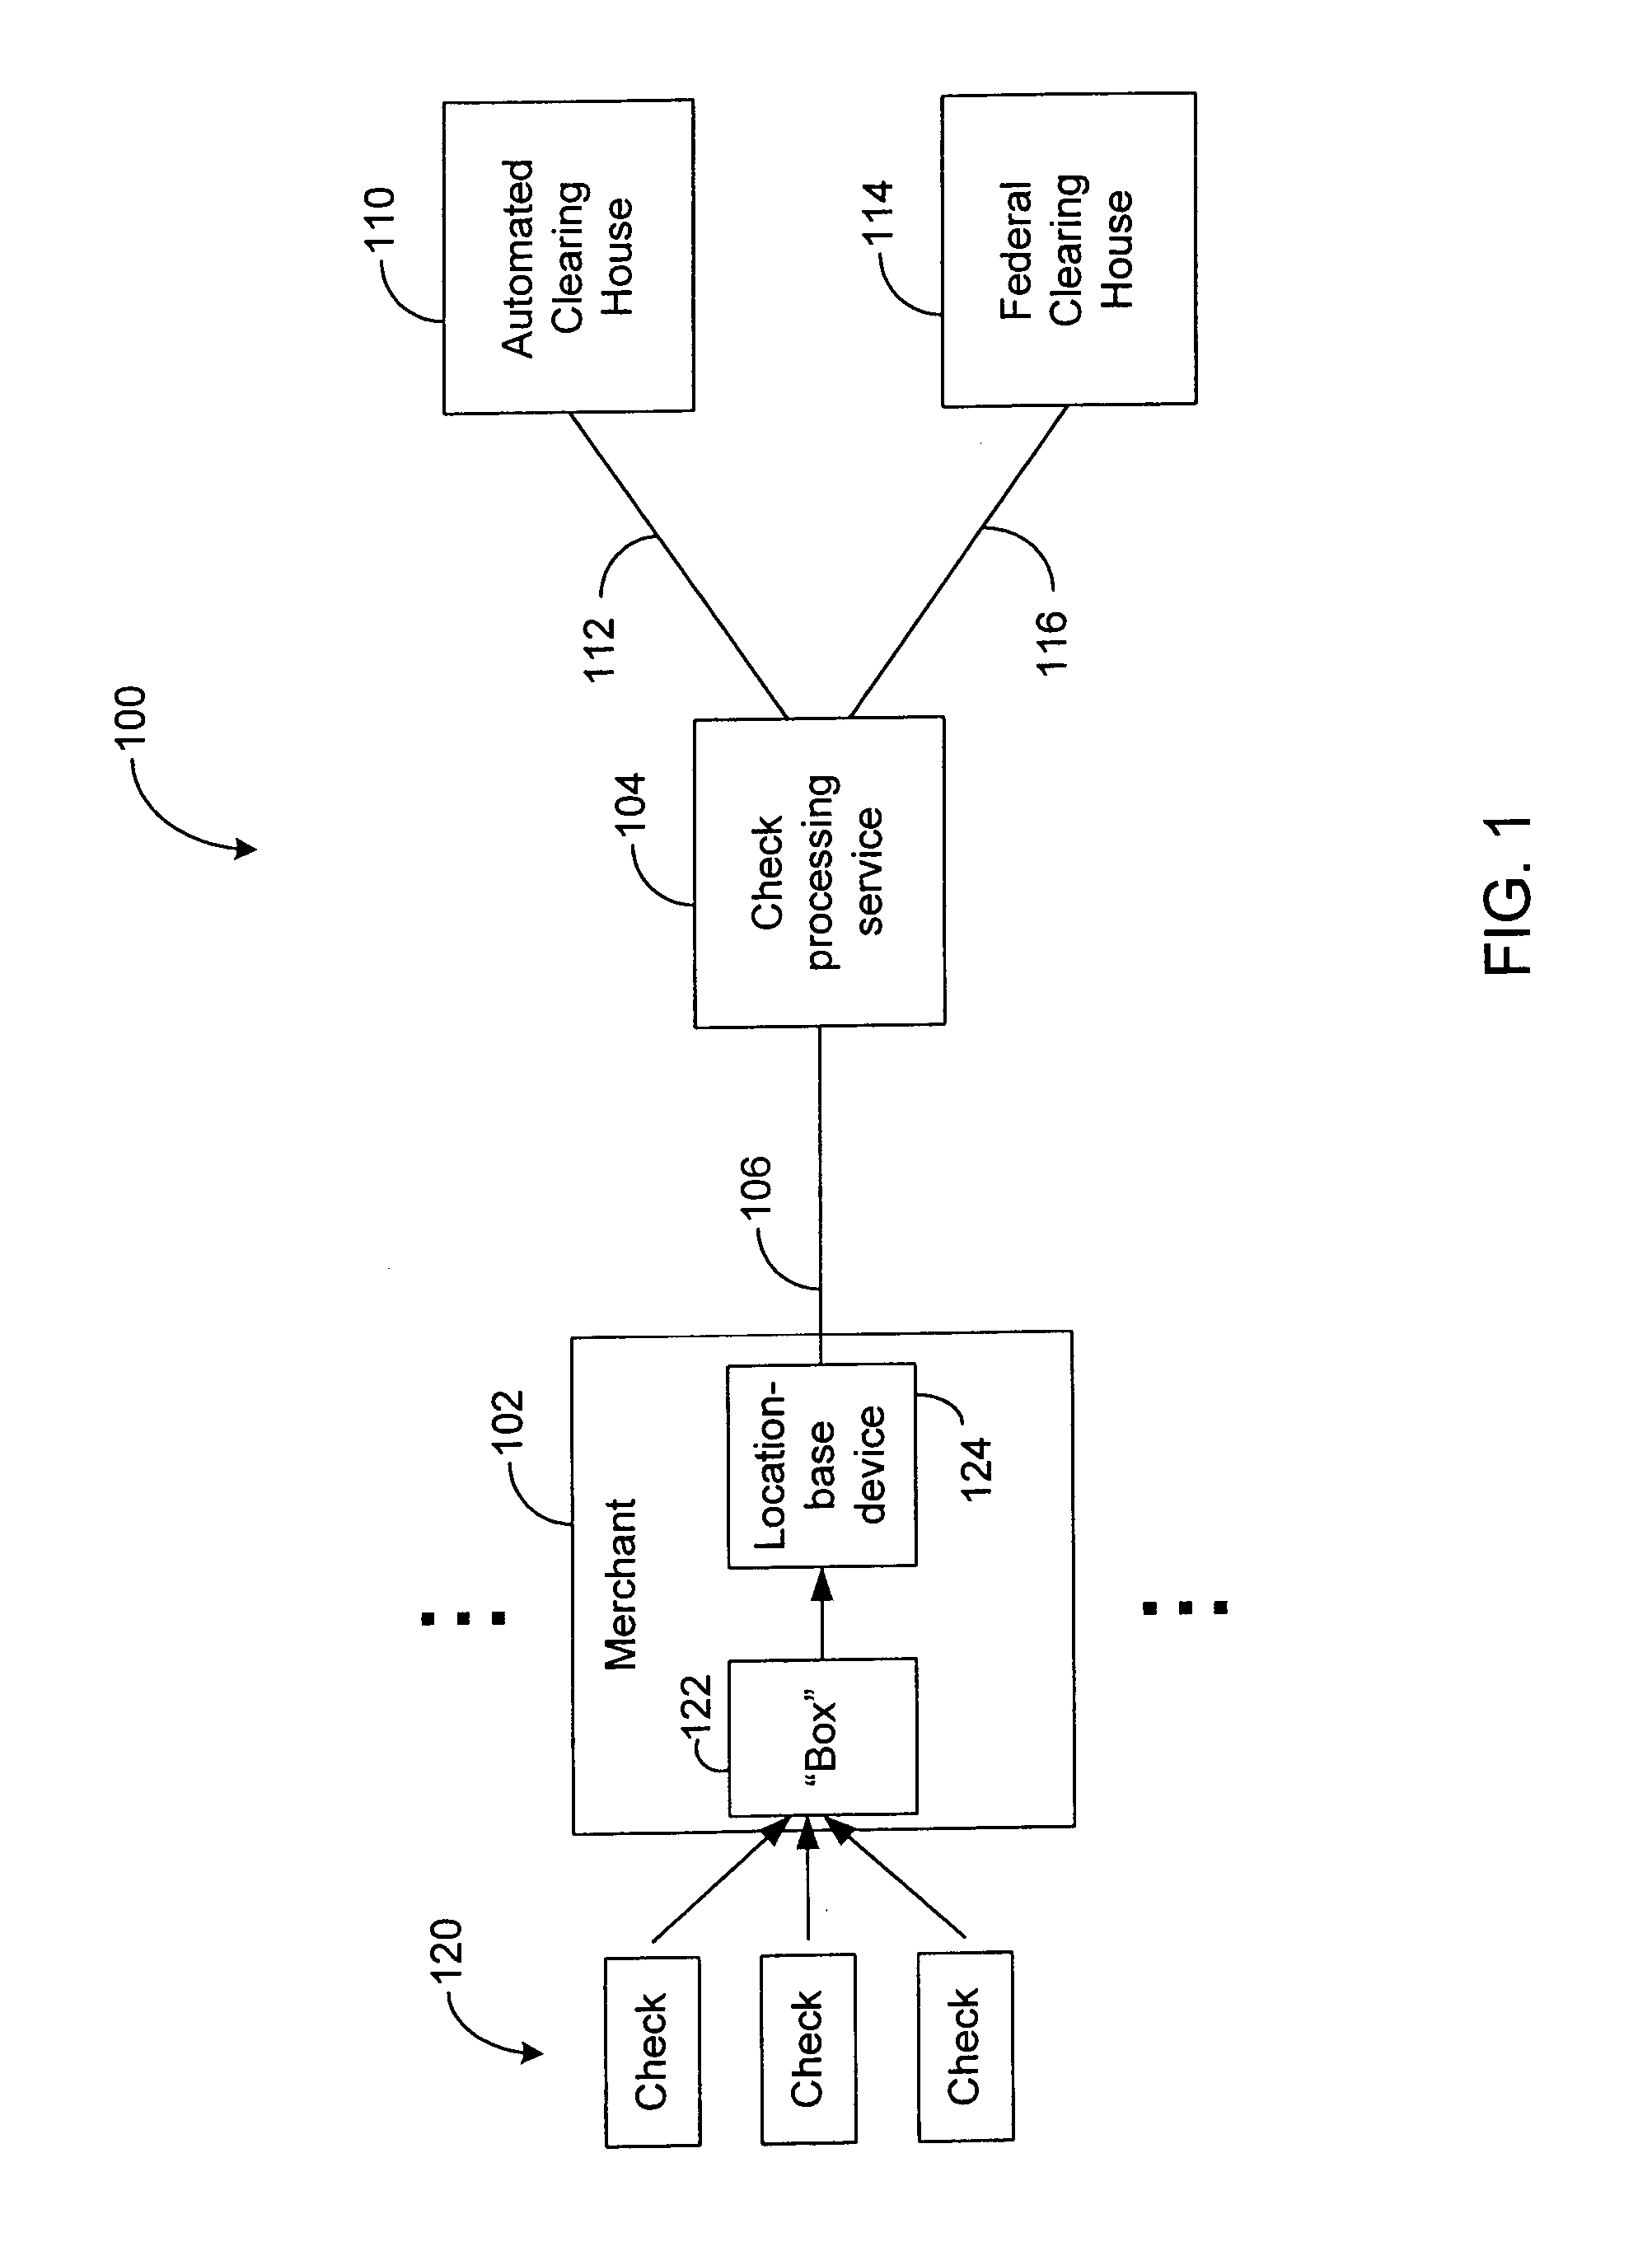 Systems and methods for managing throughput of point of sale devices